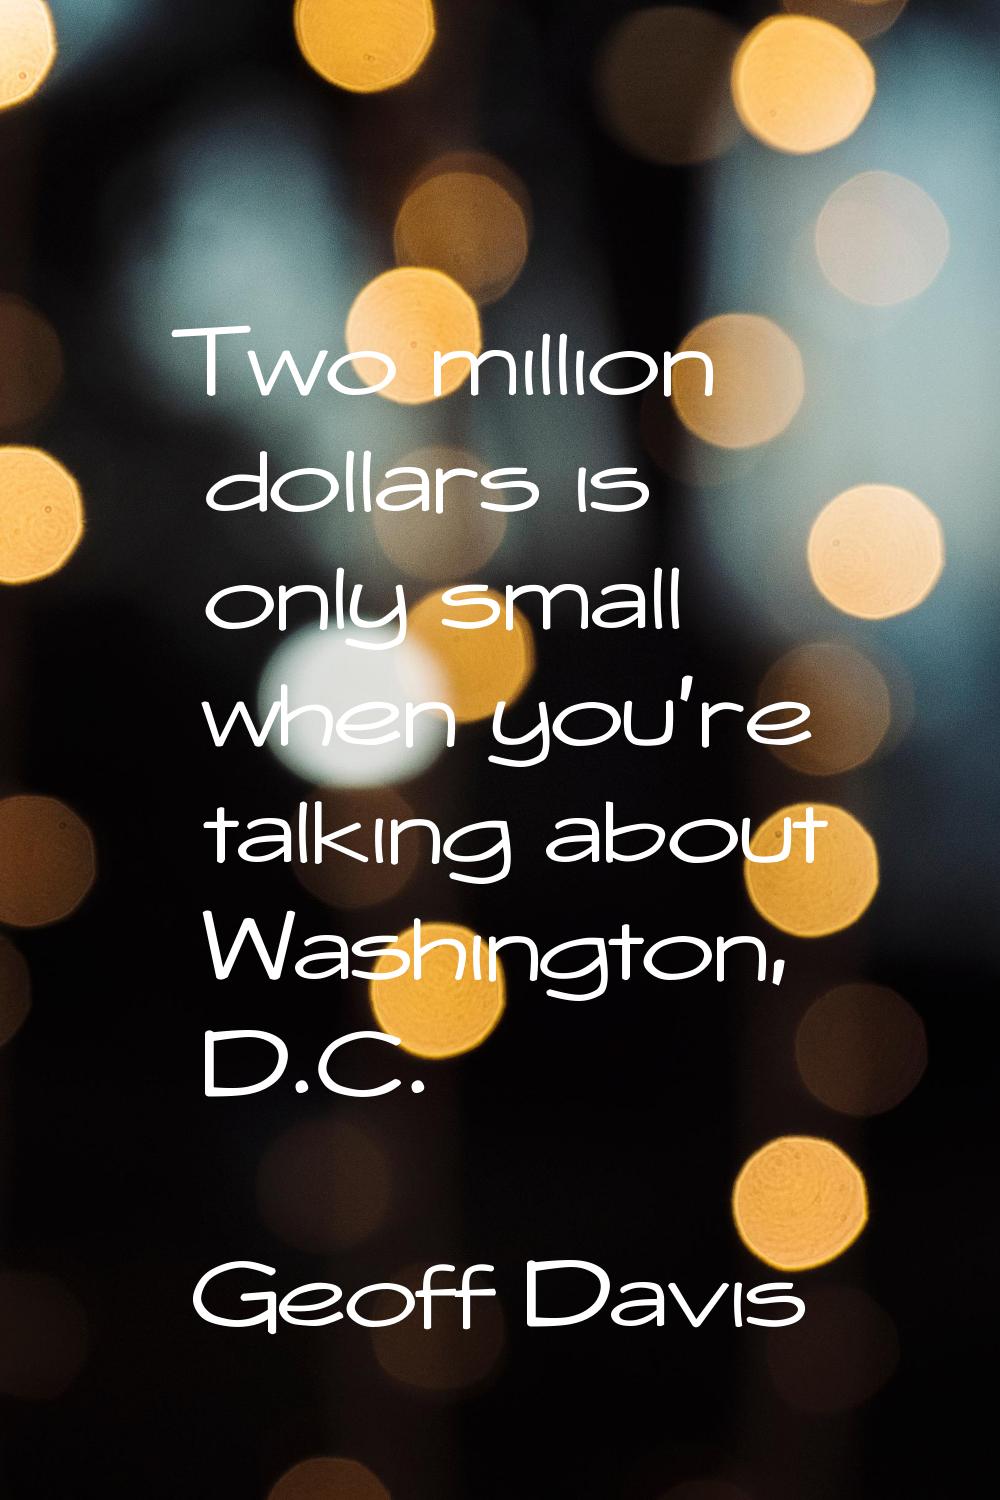 Two million dollars is only small when you're talking about Washington, D.C.